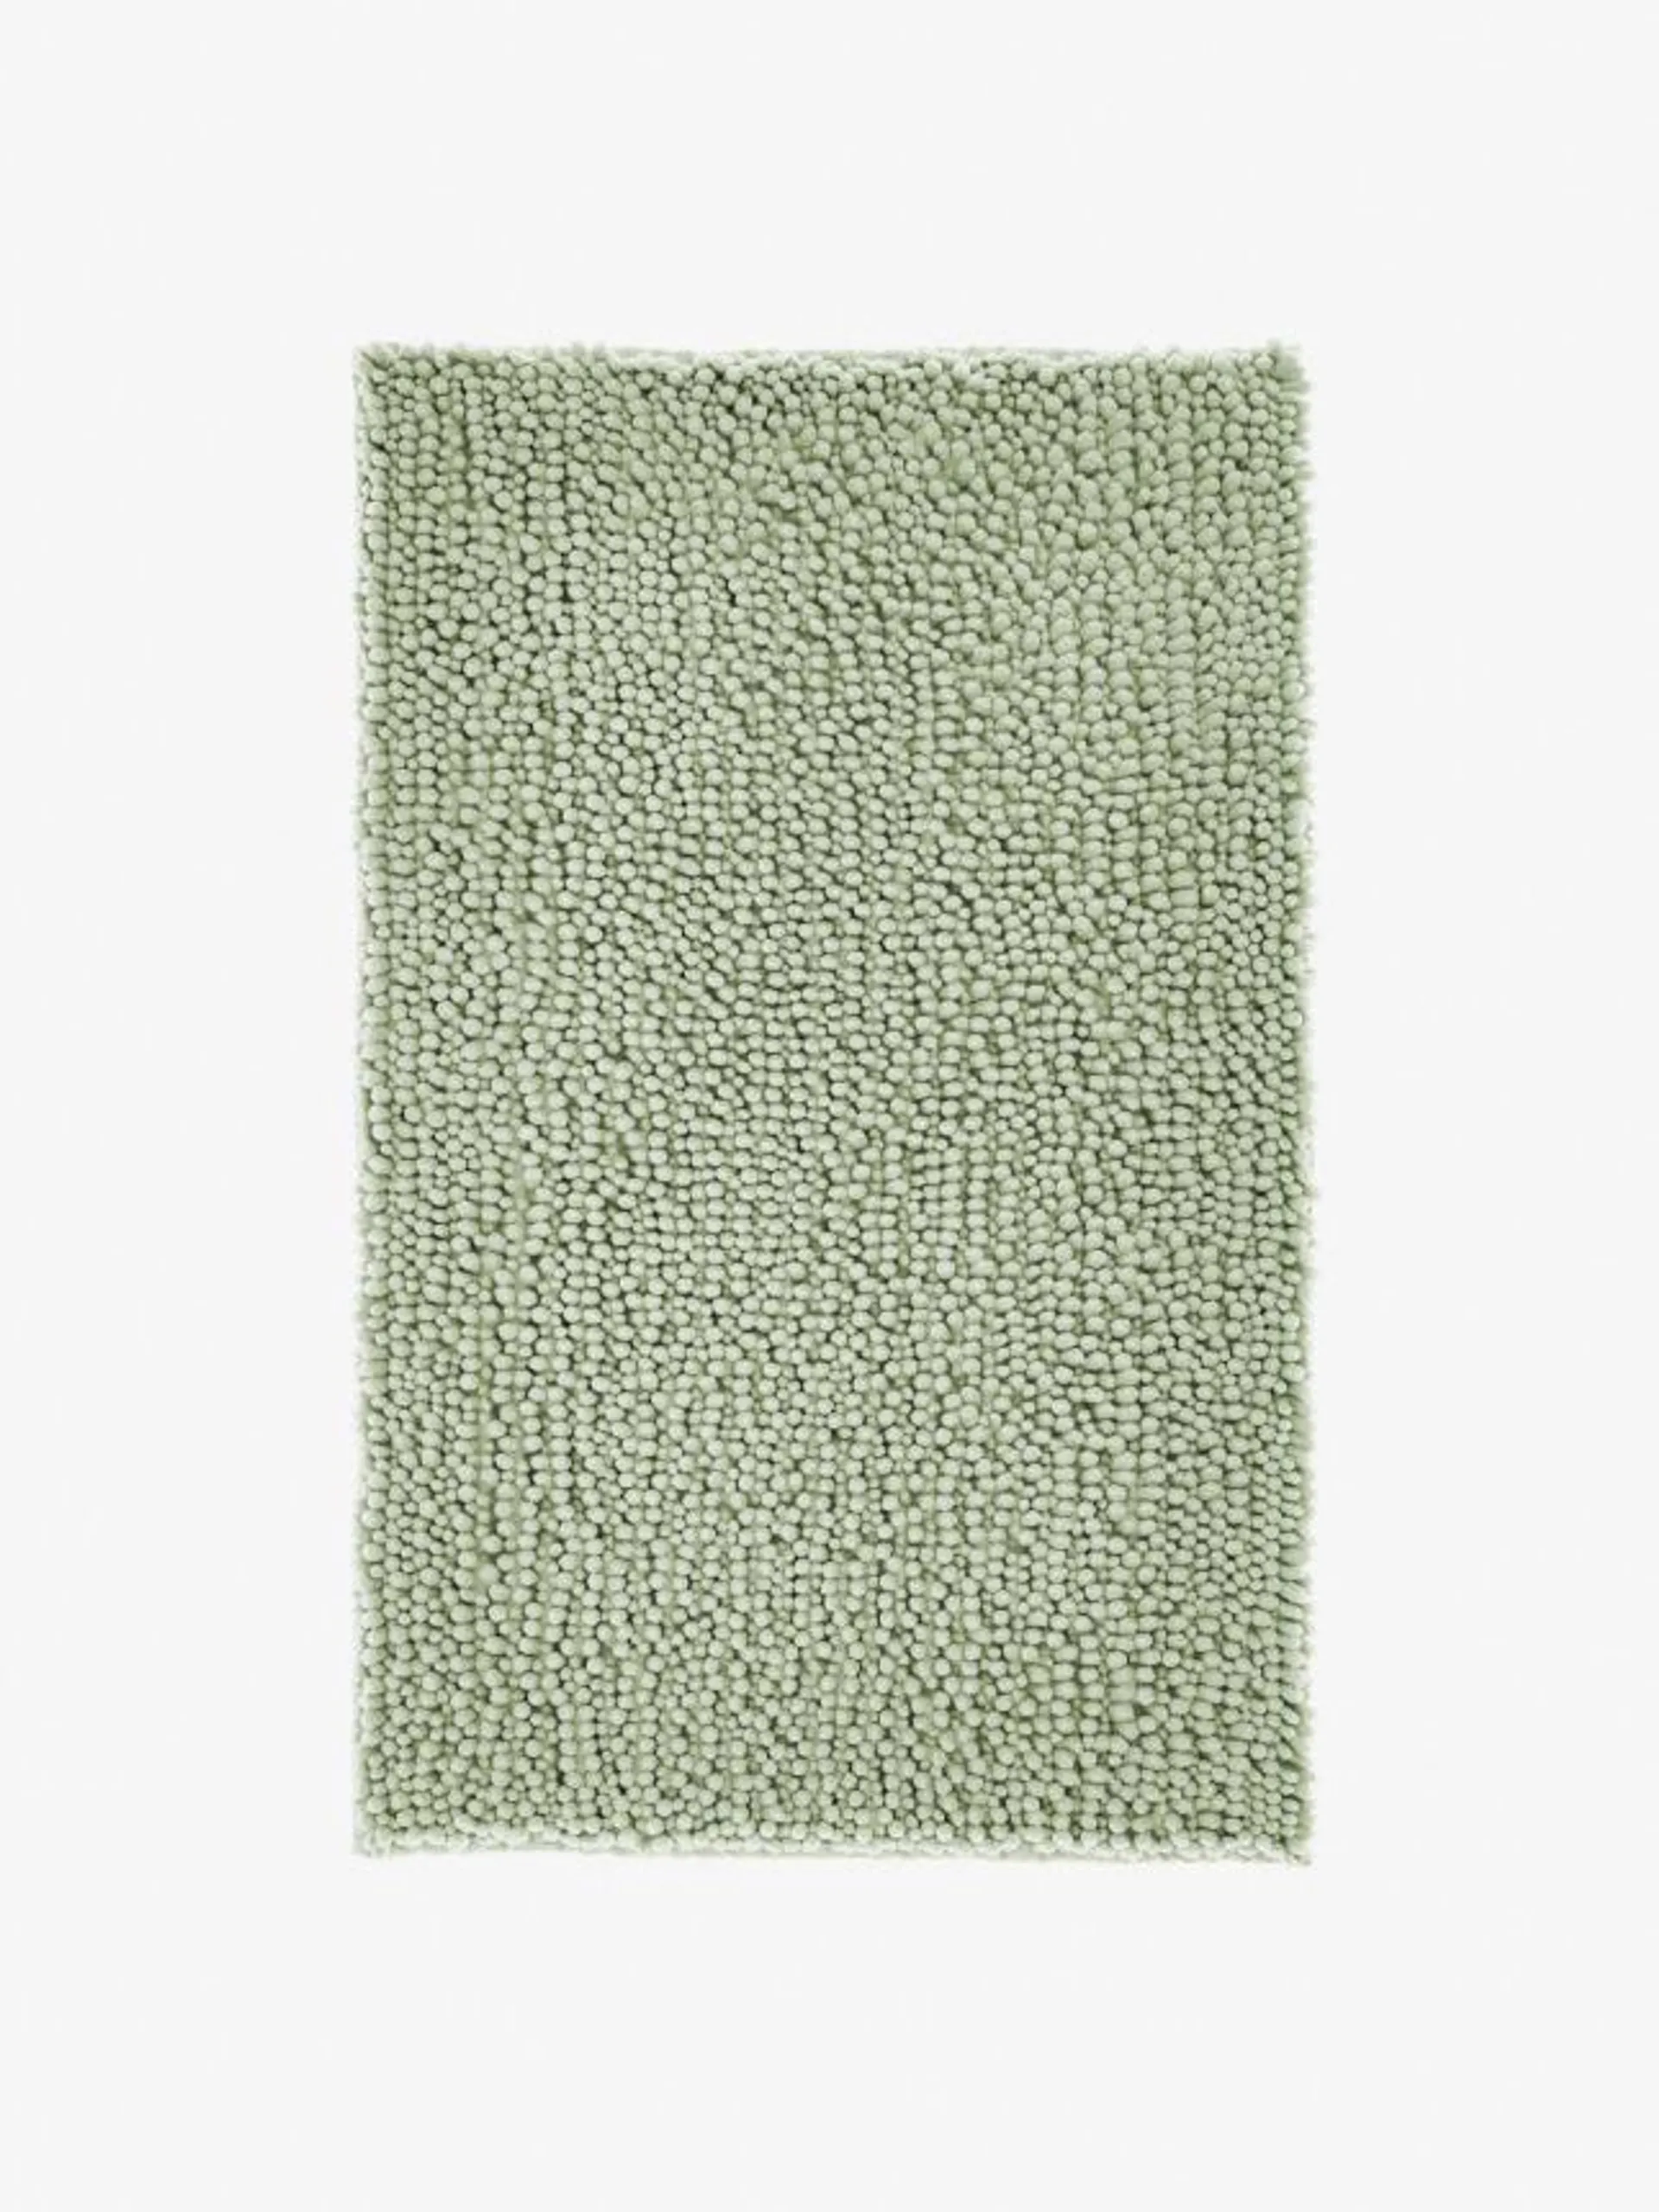 Reed Toggle Seagrass Bath Mat - 1700 GSM